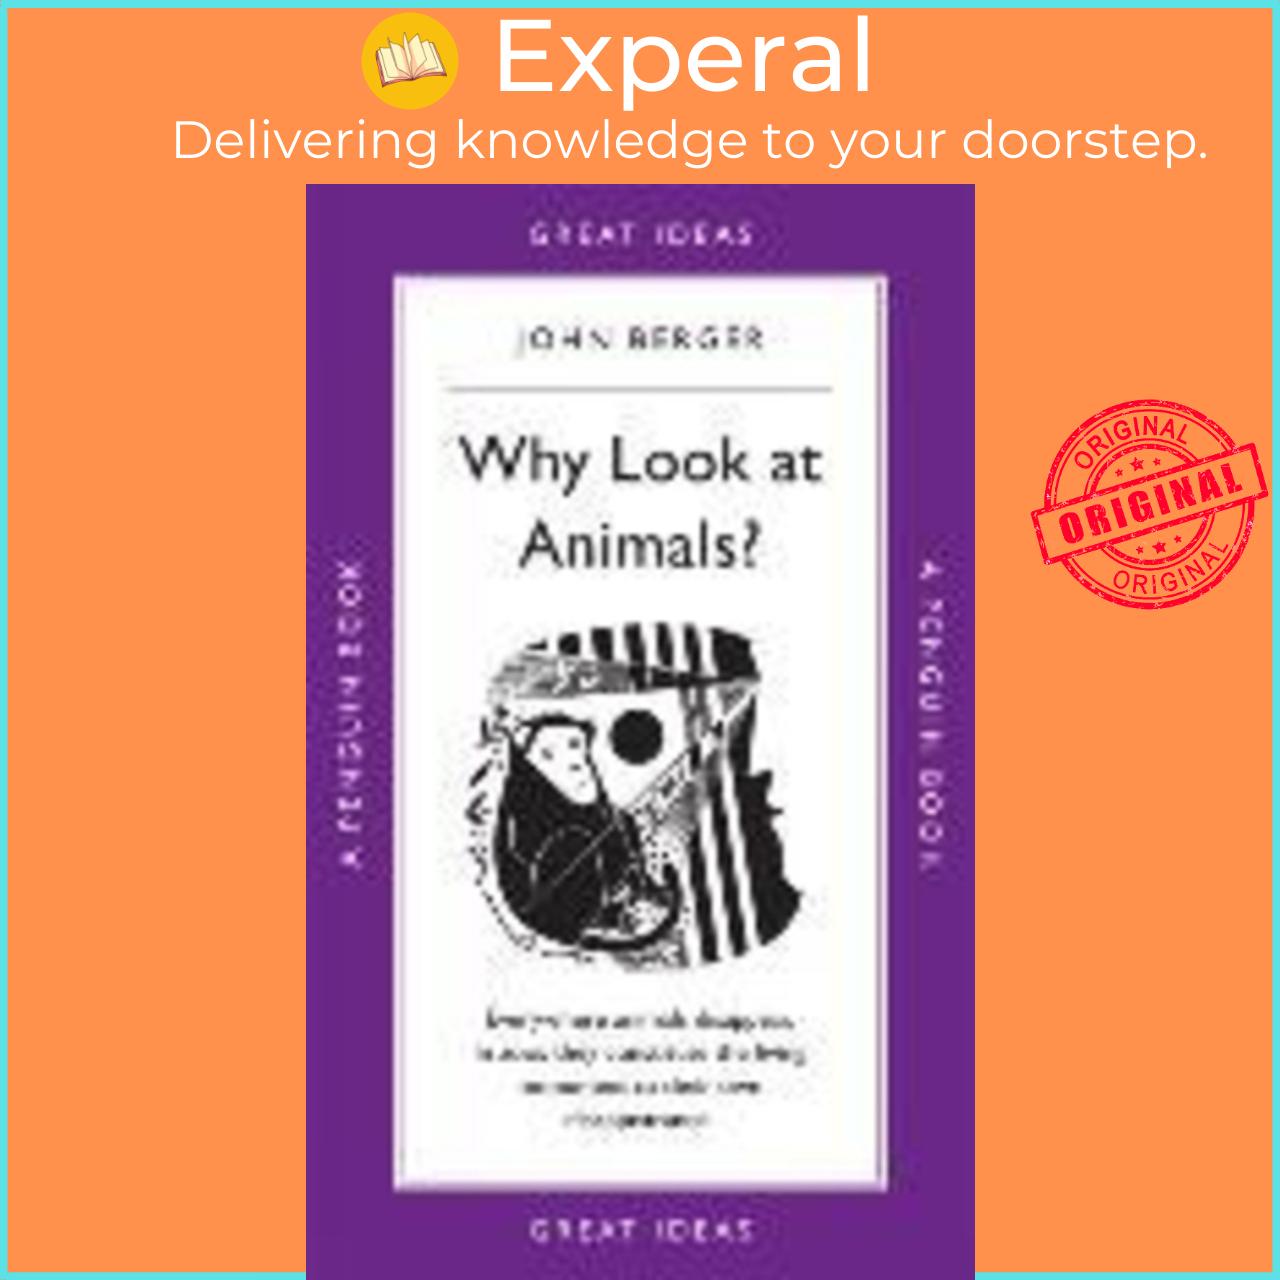 Sách - Why Look at Animals? by John Berger (UK edition, paperback)